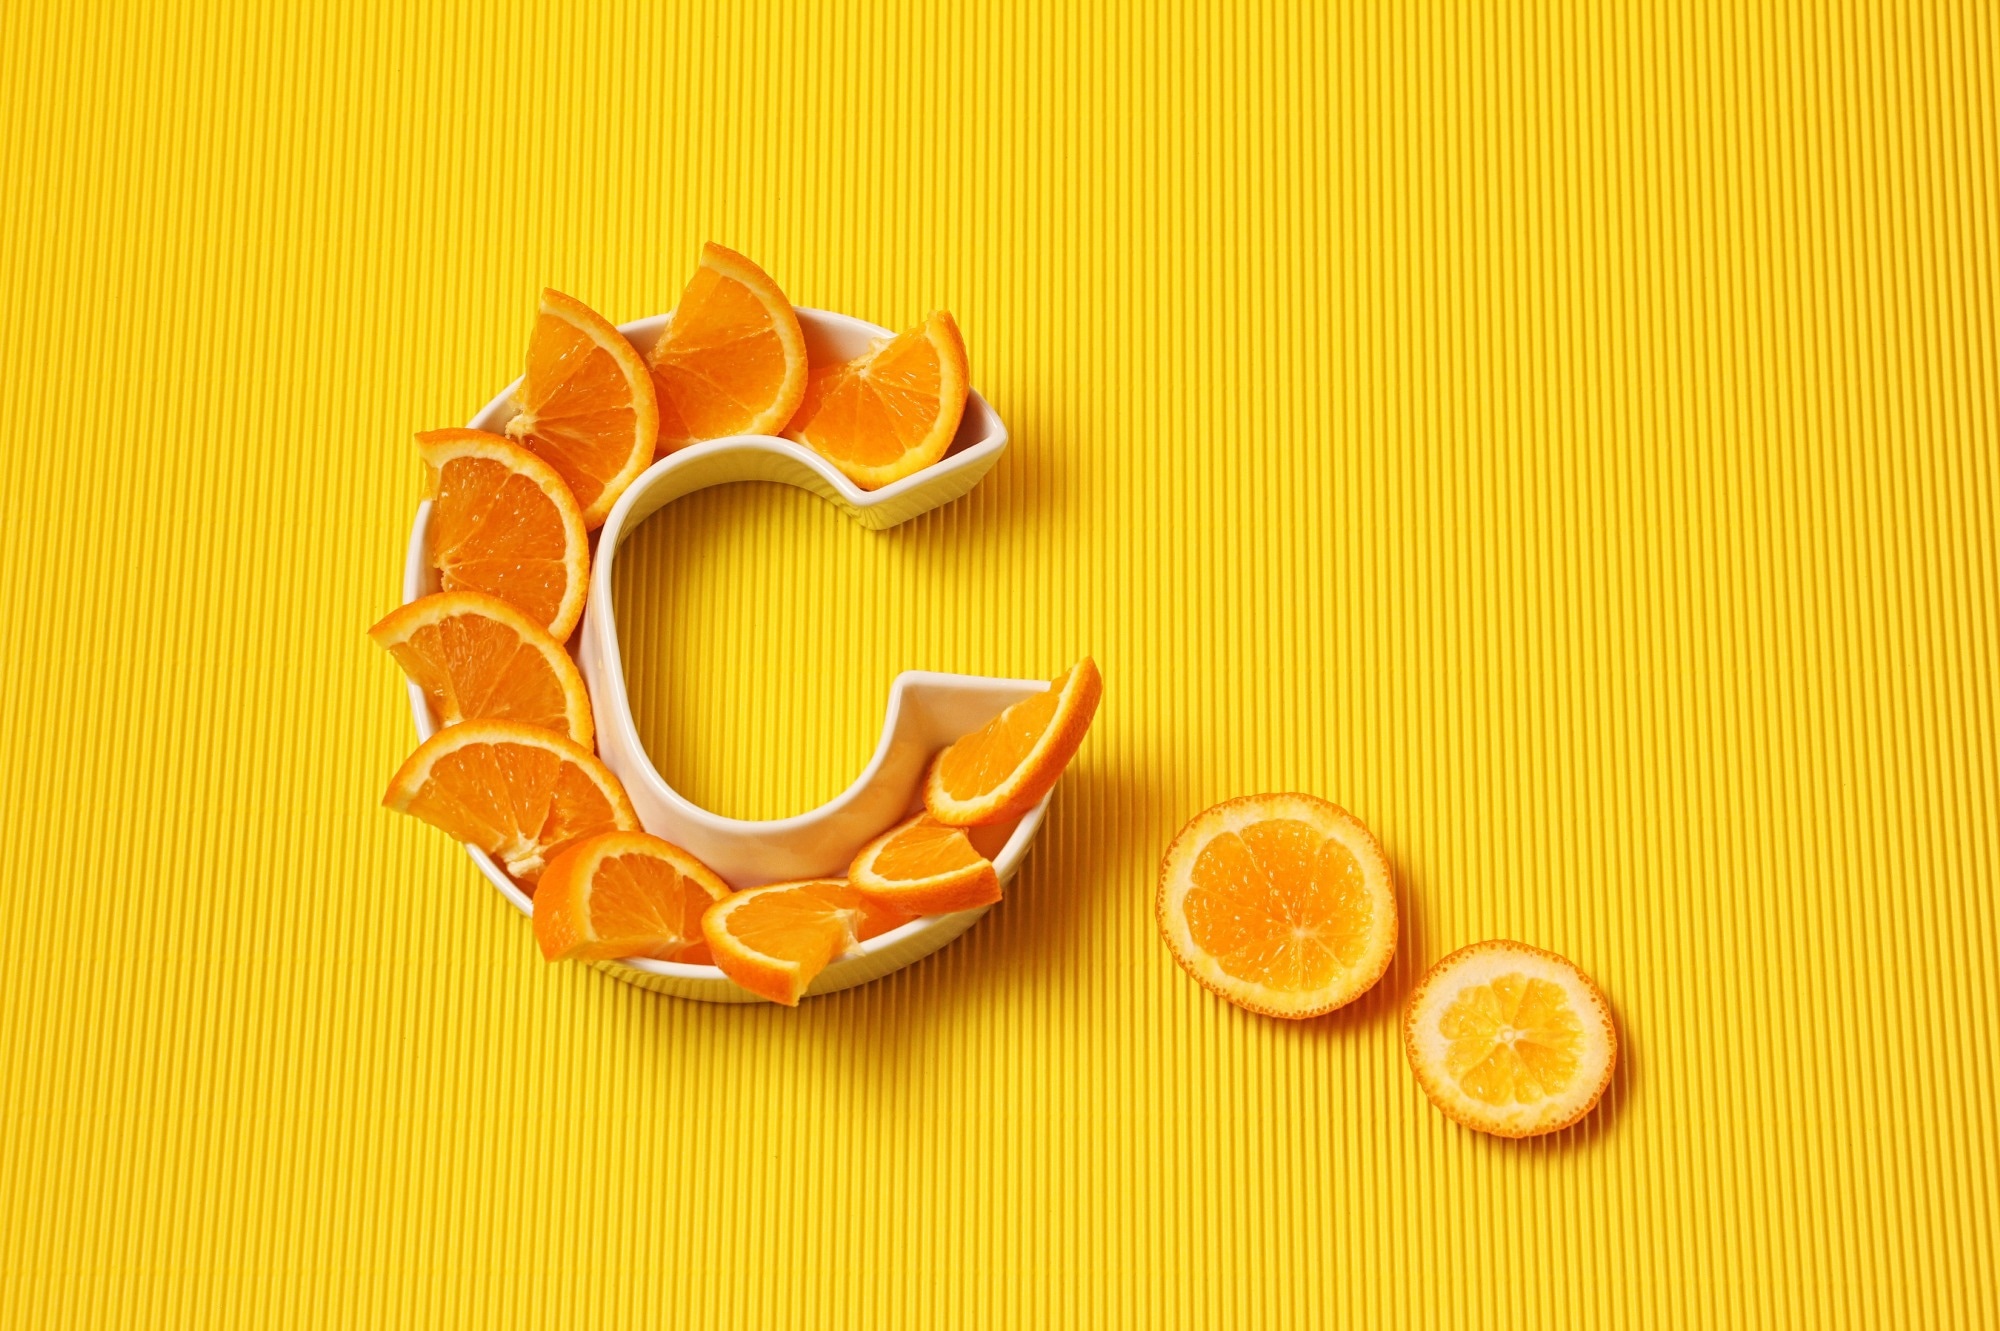 Study: Vitamin C reduces the severity of common colds: a meta-analysis. Image Credit: Gargonia/Shutterstock.com